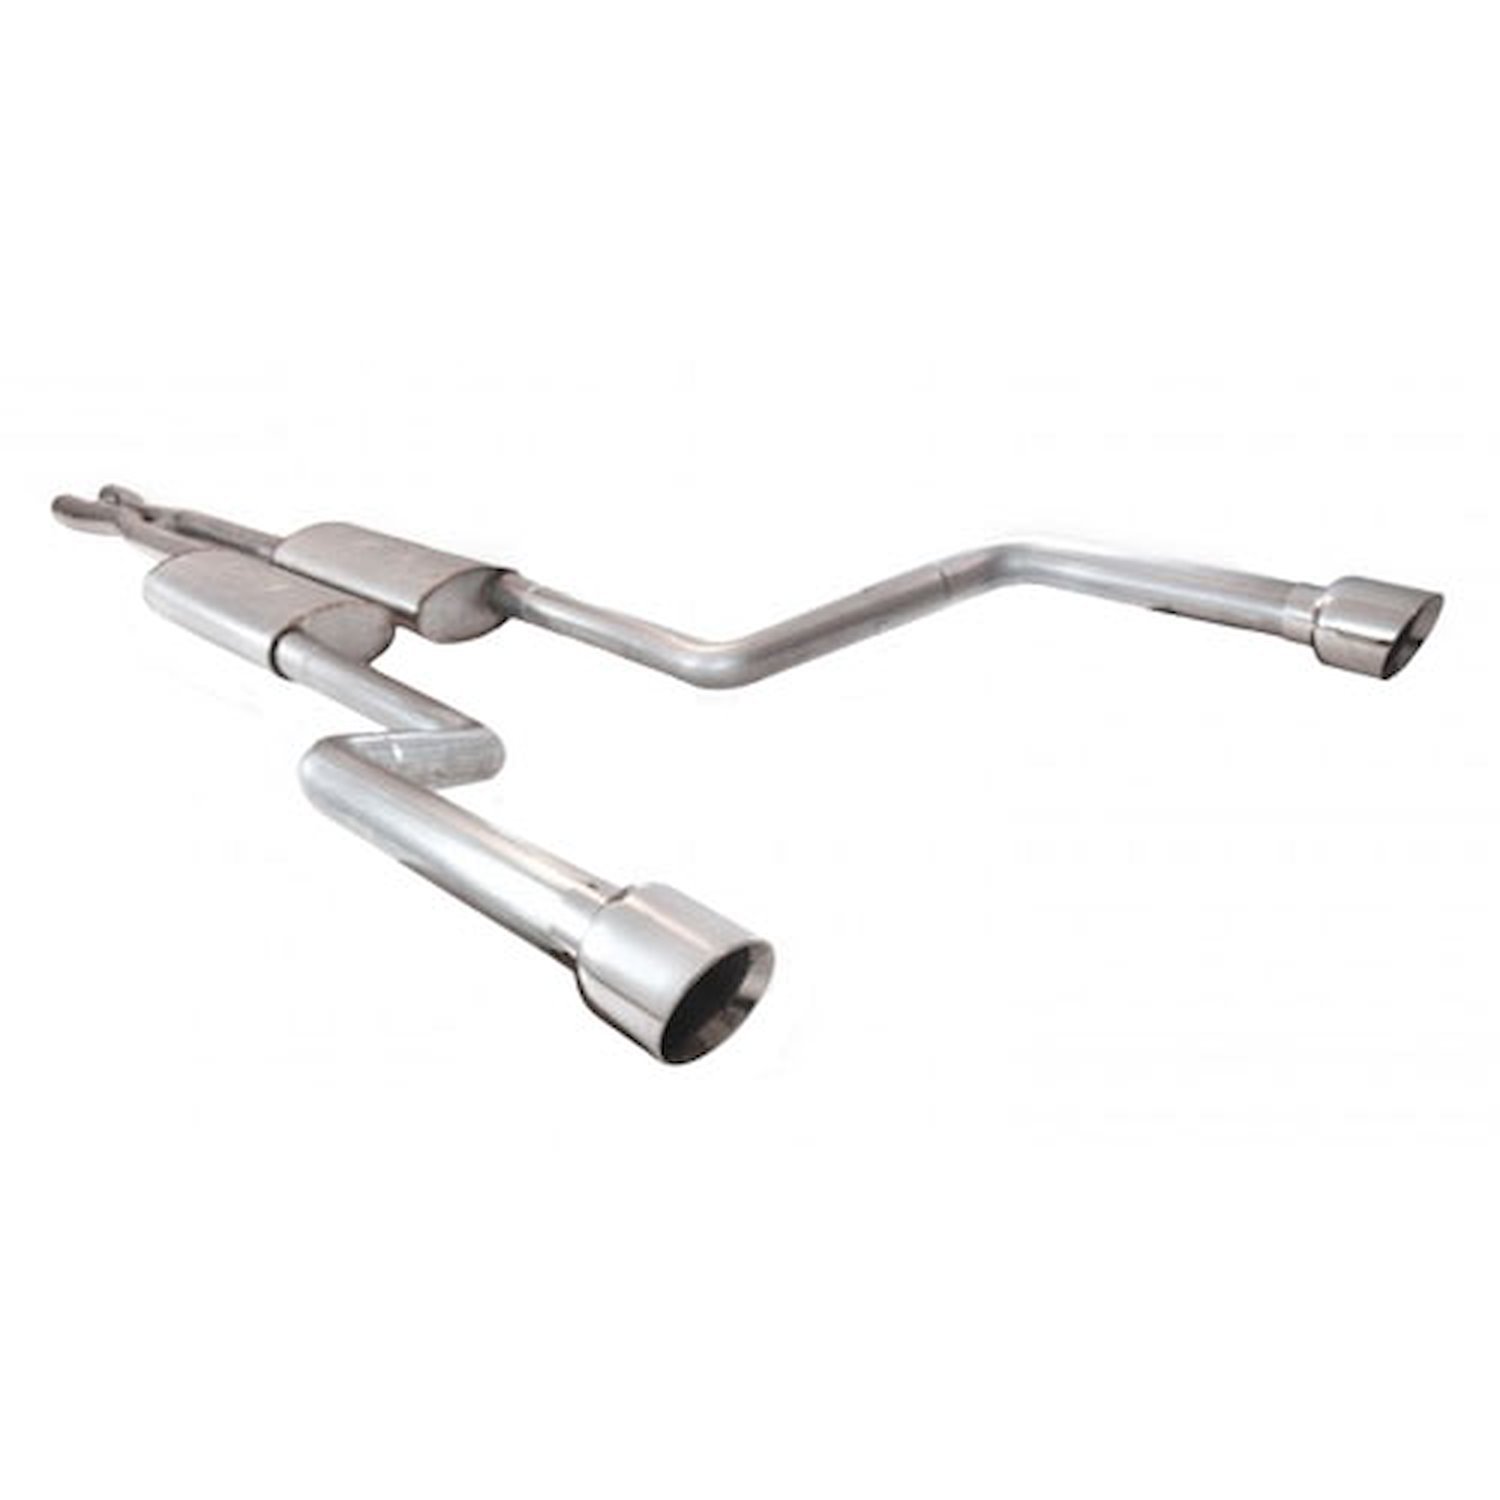 Dodge Charger - Magnum 5.7L 2005-12 Exhaust. Stainless steel 2-1/2 catback exhaust system with X-pip